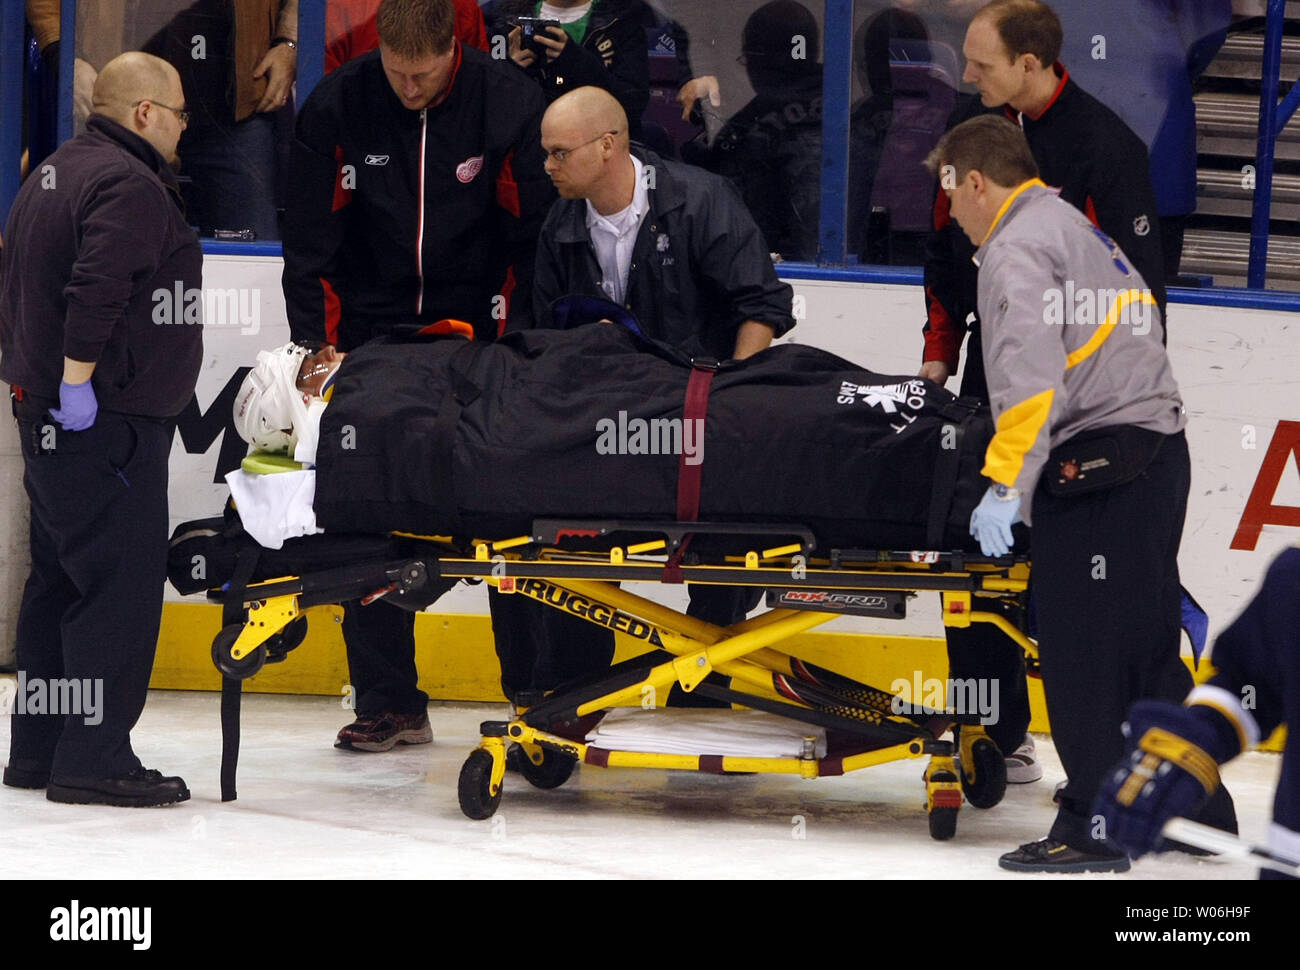 Emergency workers remove Detroit Red Wings Marian Hossa from the ice after a collision with St. Louis Blues player Roman Polak in the first period at the Scottrade Center in St. Louis on March 3, 2009.  Hossa was taken to a local hospital for observation.   (UPI Photo/Bill Greenblatt) Stock Photo